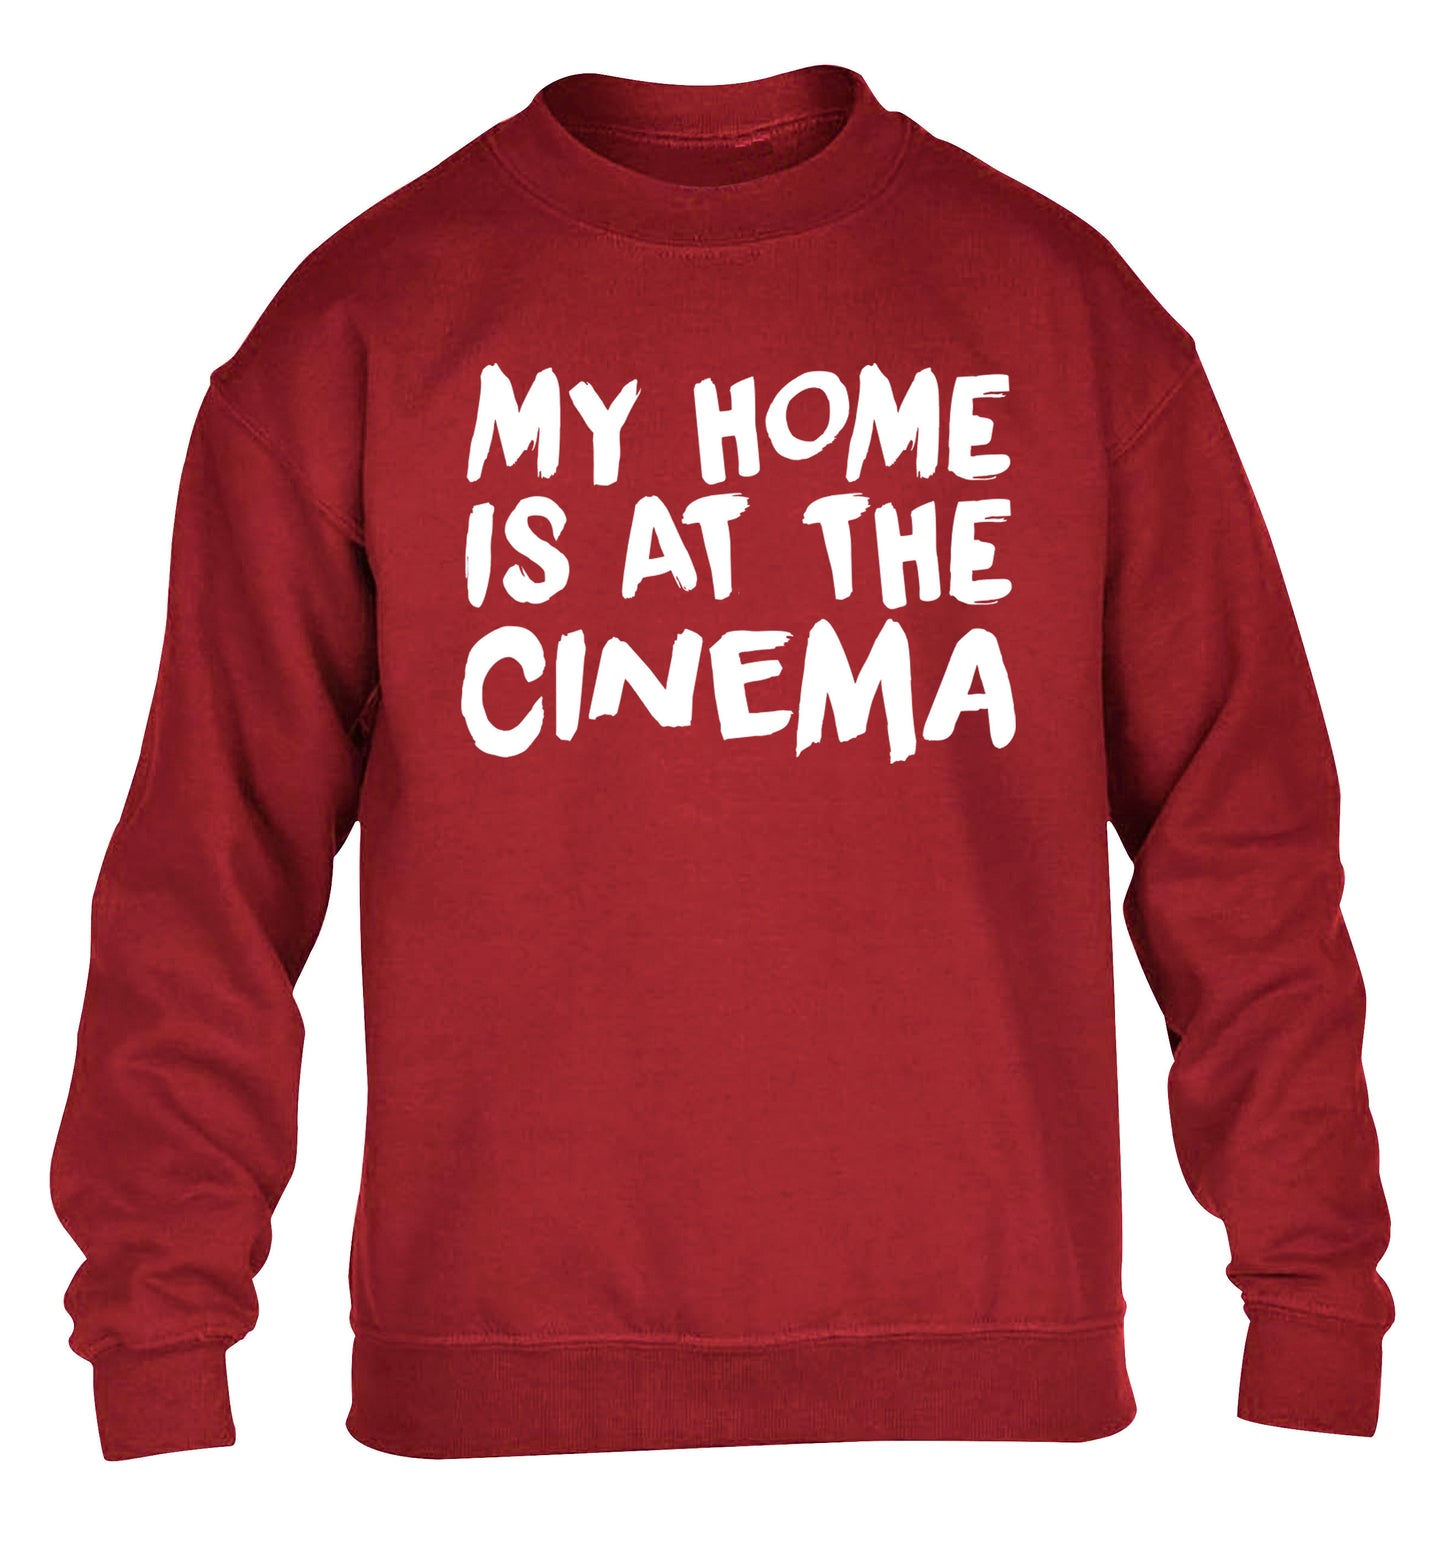 My home is at the cinema children's grey sweater 12-14 Years